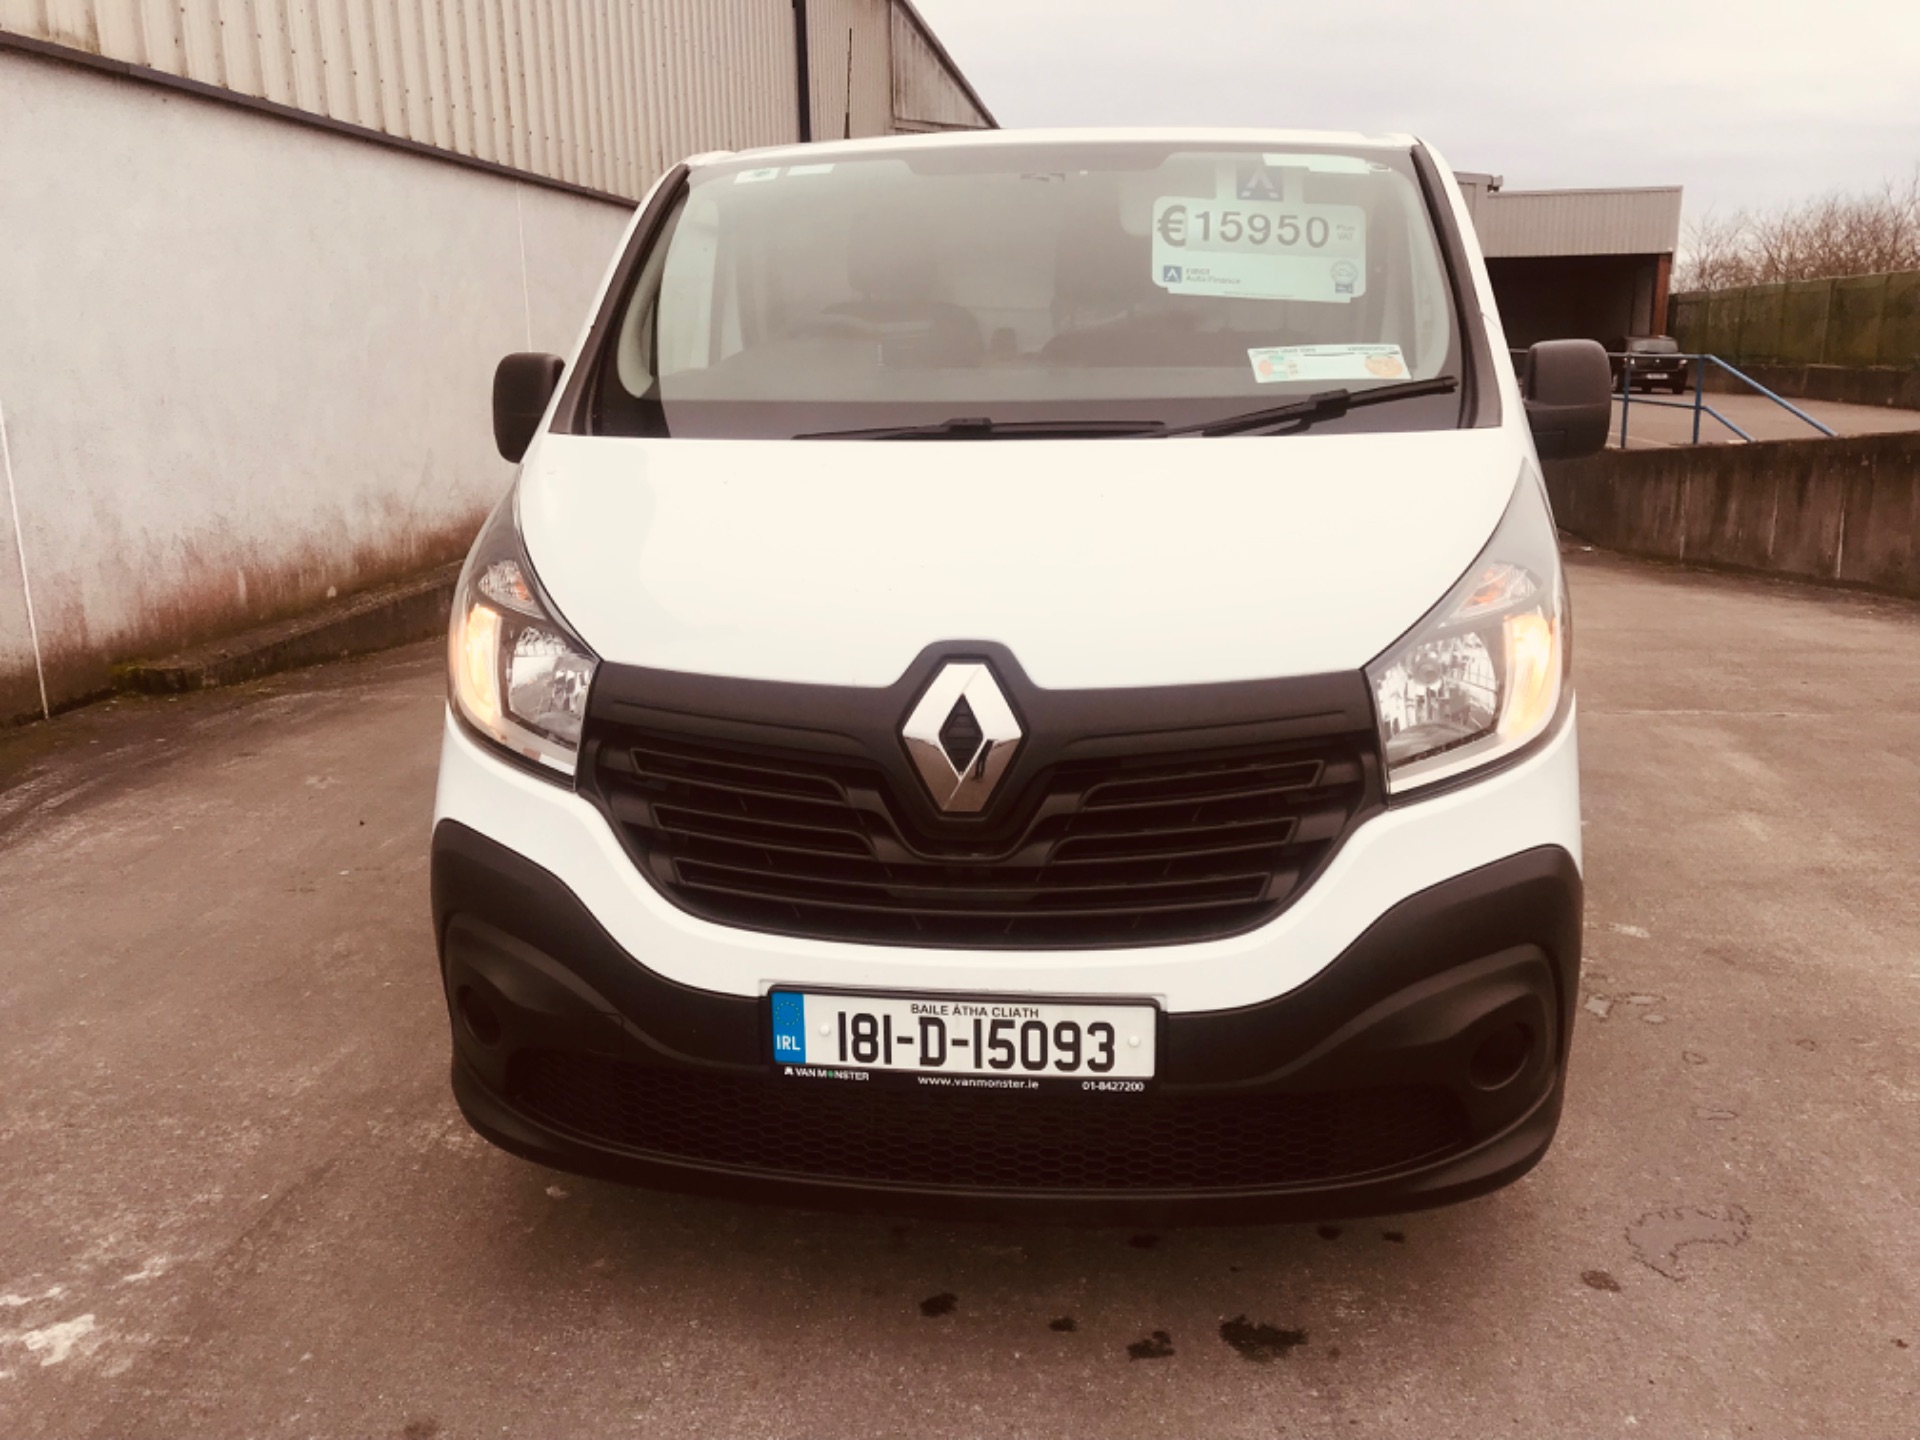 2018 Renault Trafic LL29 DCI 120 Business 3DR (181D15093) Thumbnail 2